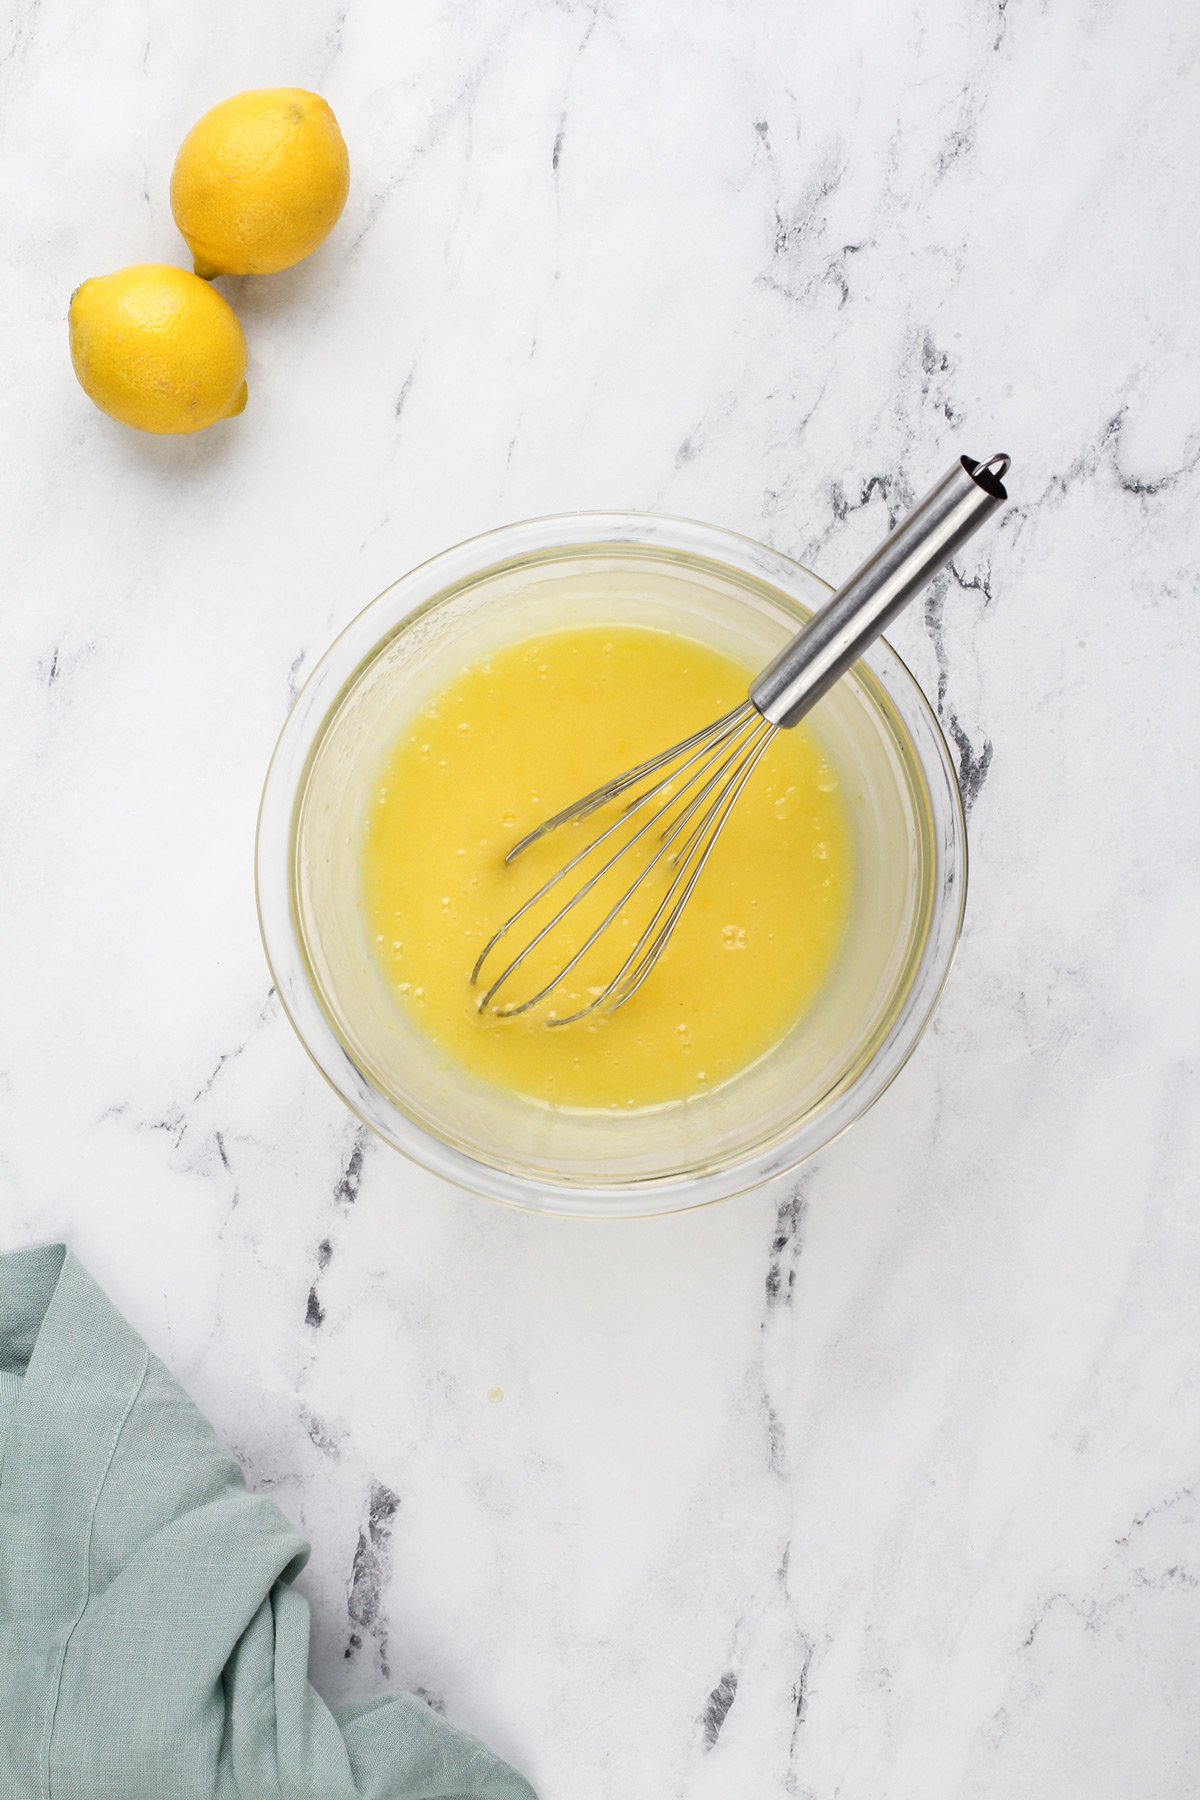 Microwave lemon curd whisked in a glass bowl.